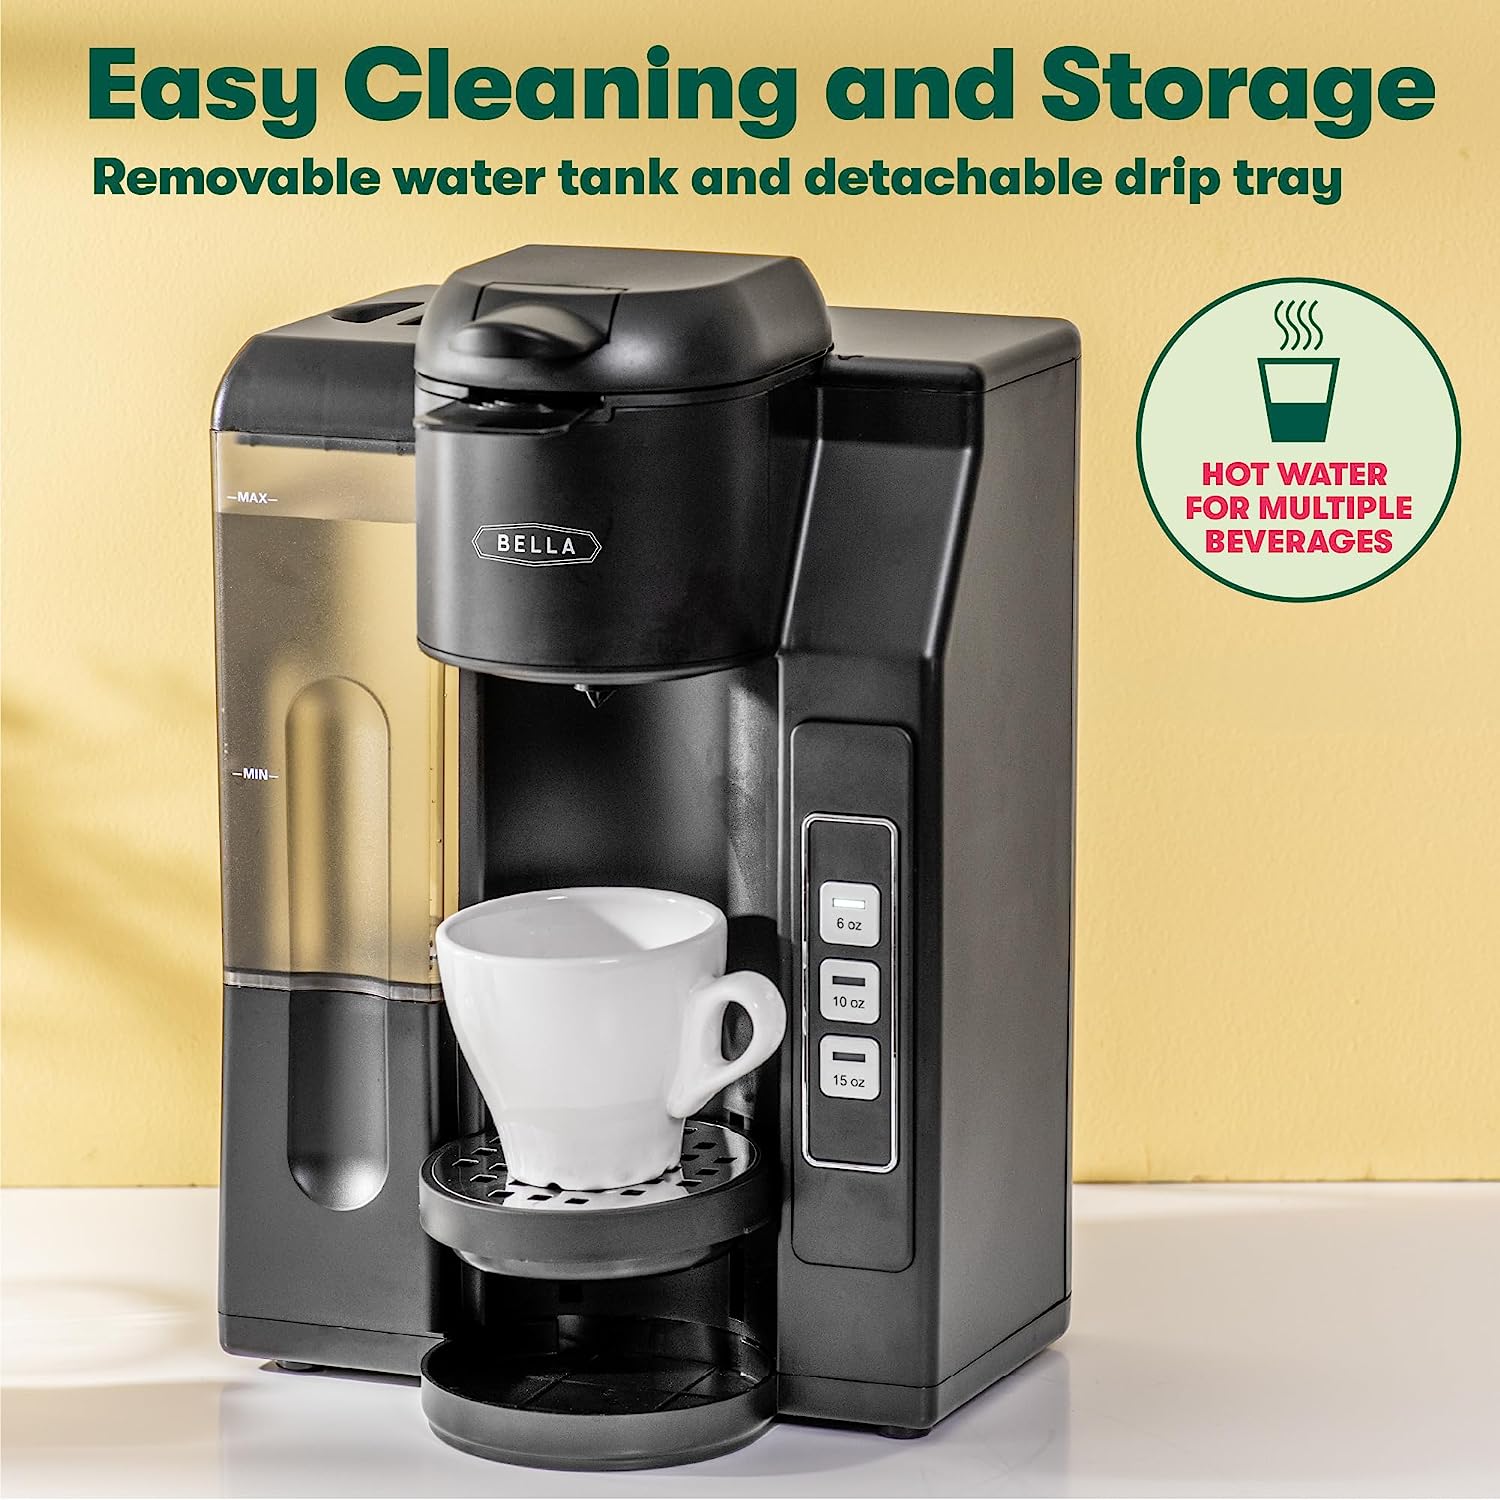 https://bigbigmart.com/wp-content/uploads/2023/07/BELLA-Single-Serve-Coffee-Maker-Dual-Brew-K-cup-Compatible-Ground-Coffee-Brewer-with-Removable-Water-Tank-Adjustable-Drip-Tray-Perfect-for-Travel4.jpg